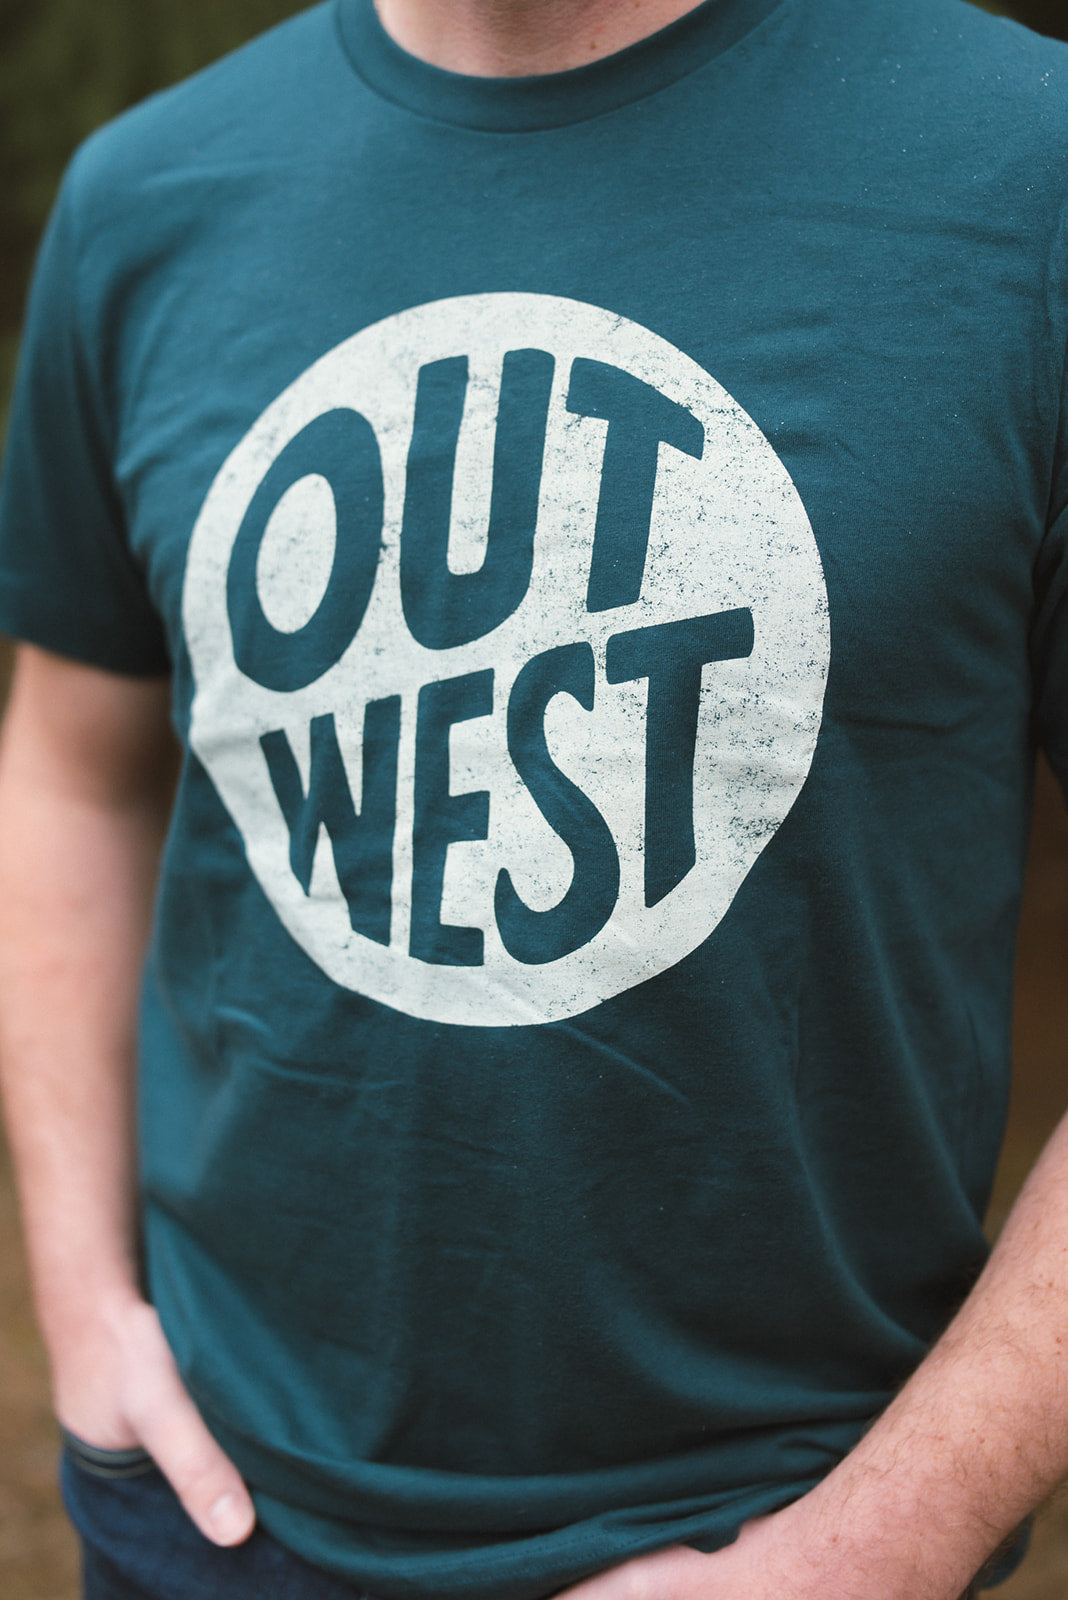 Out West Deep Sea Tee